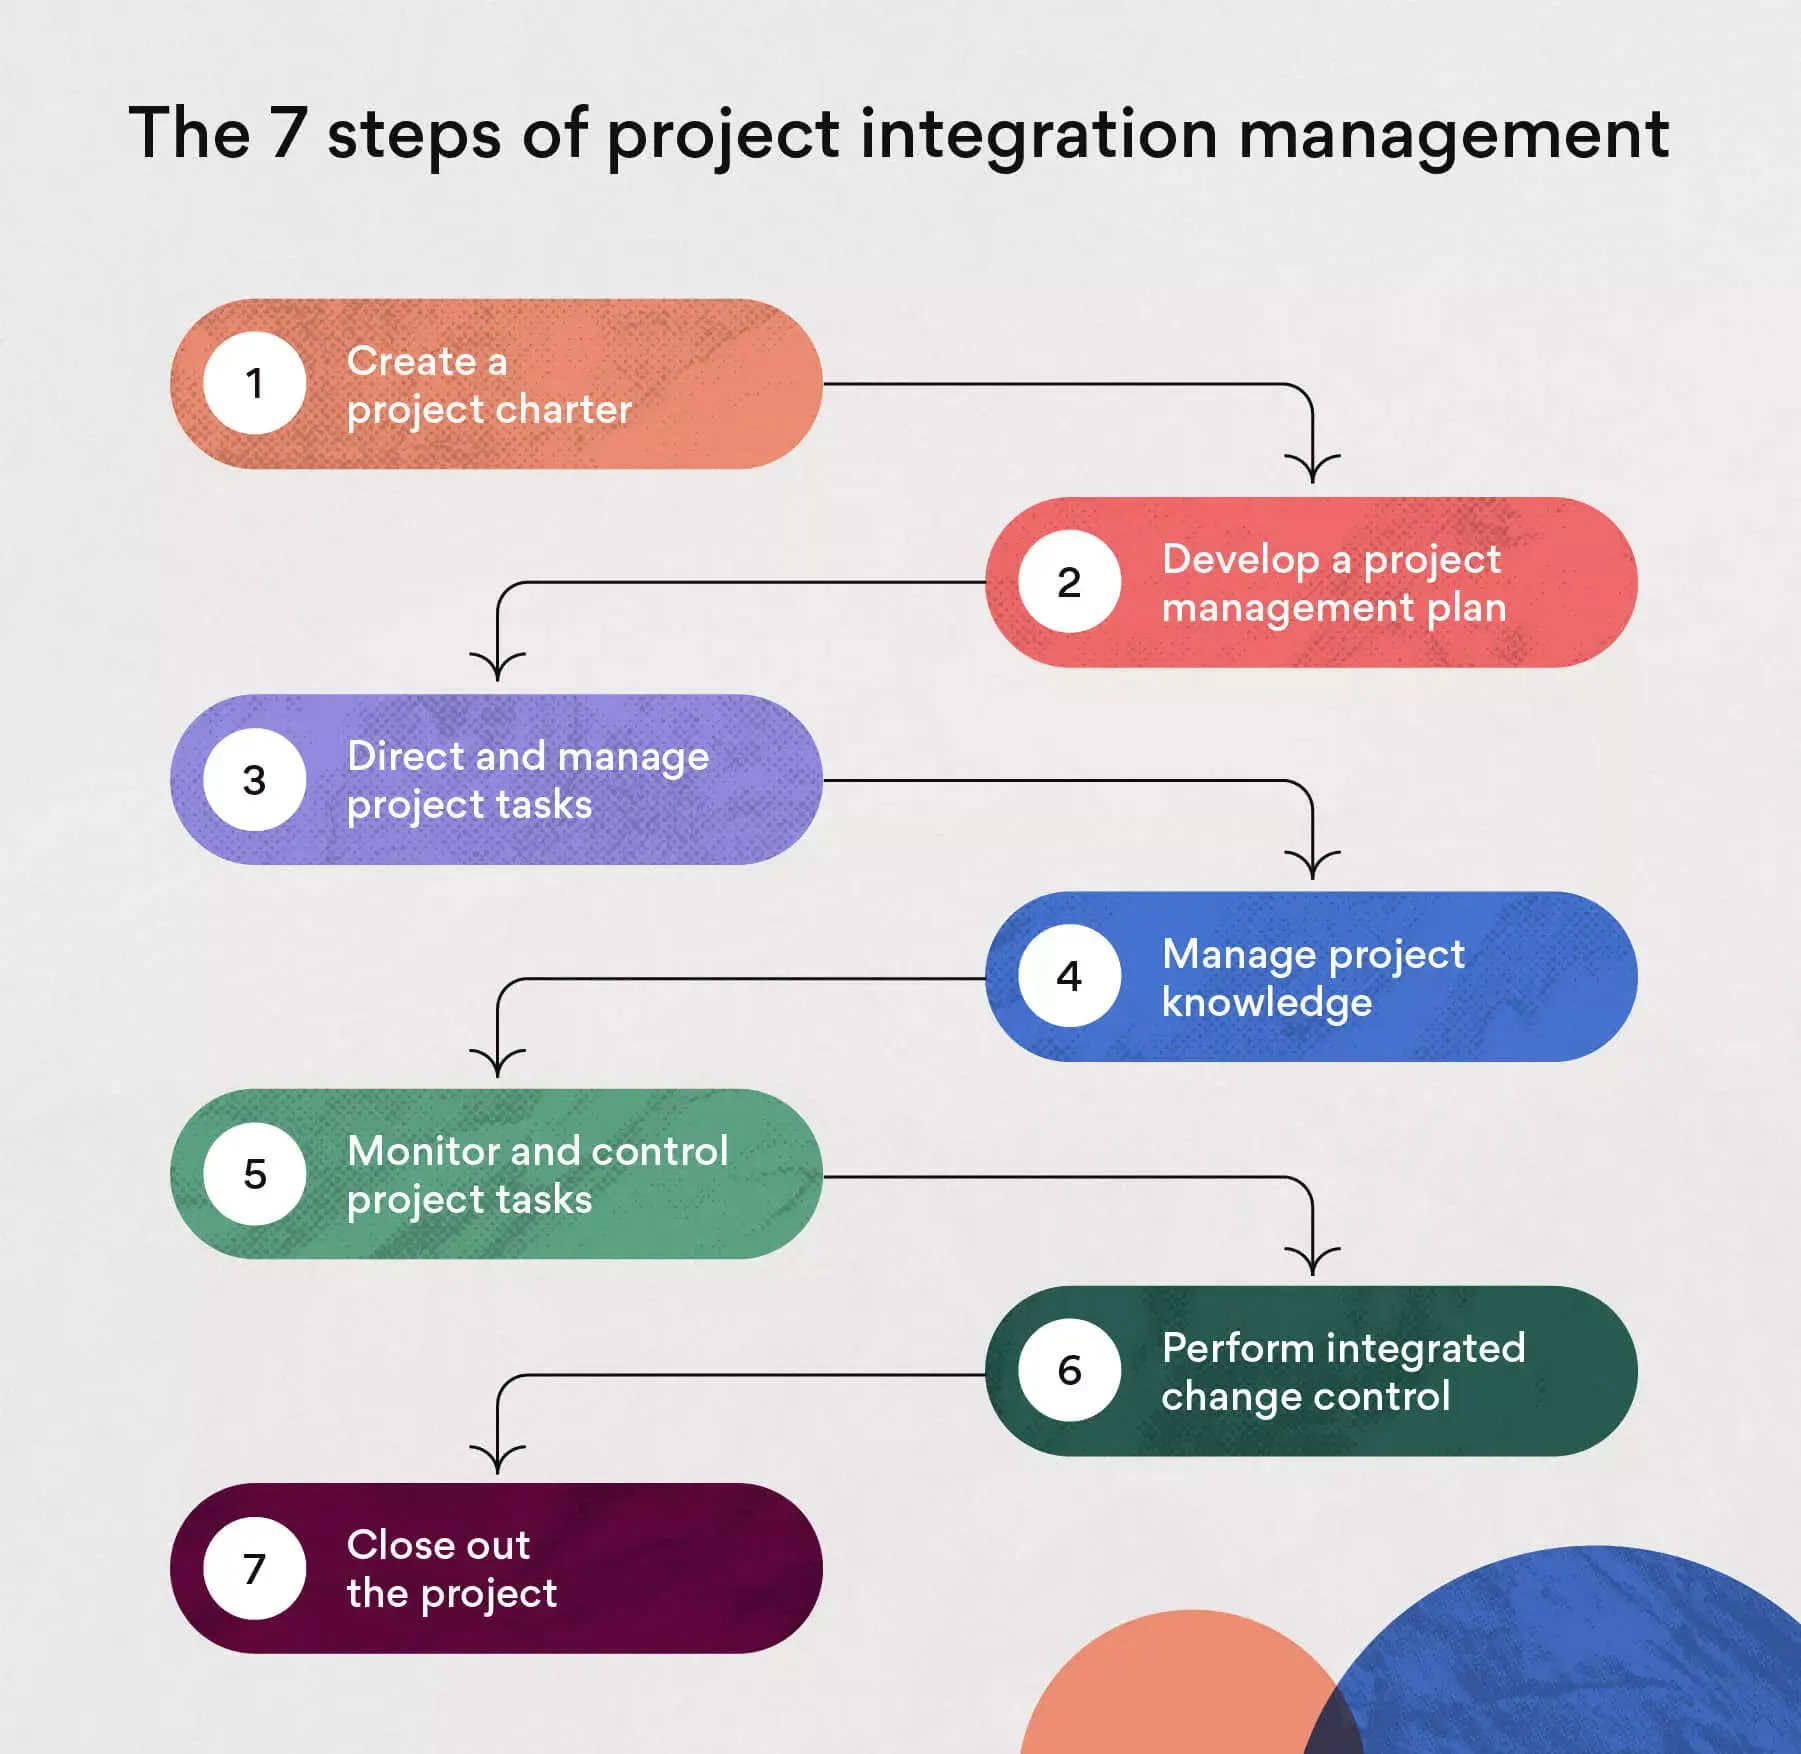 [inline illustration] The 7 steps of project integration management (infographic)